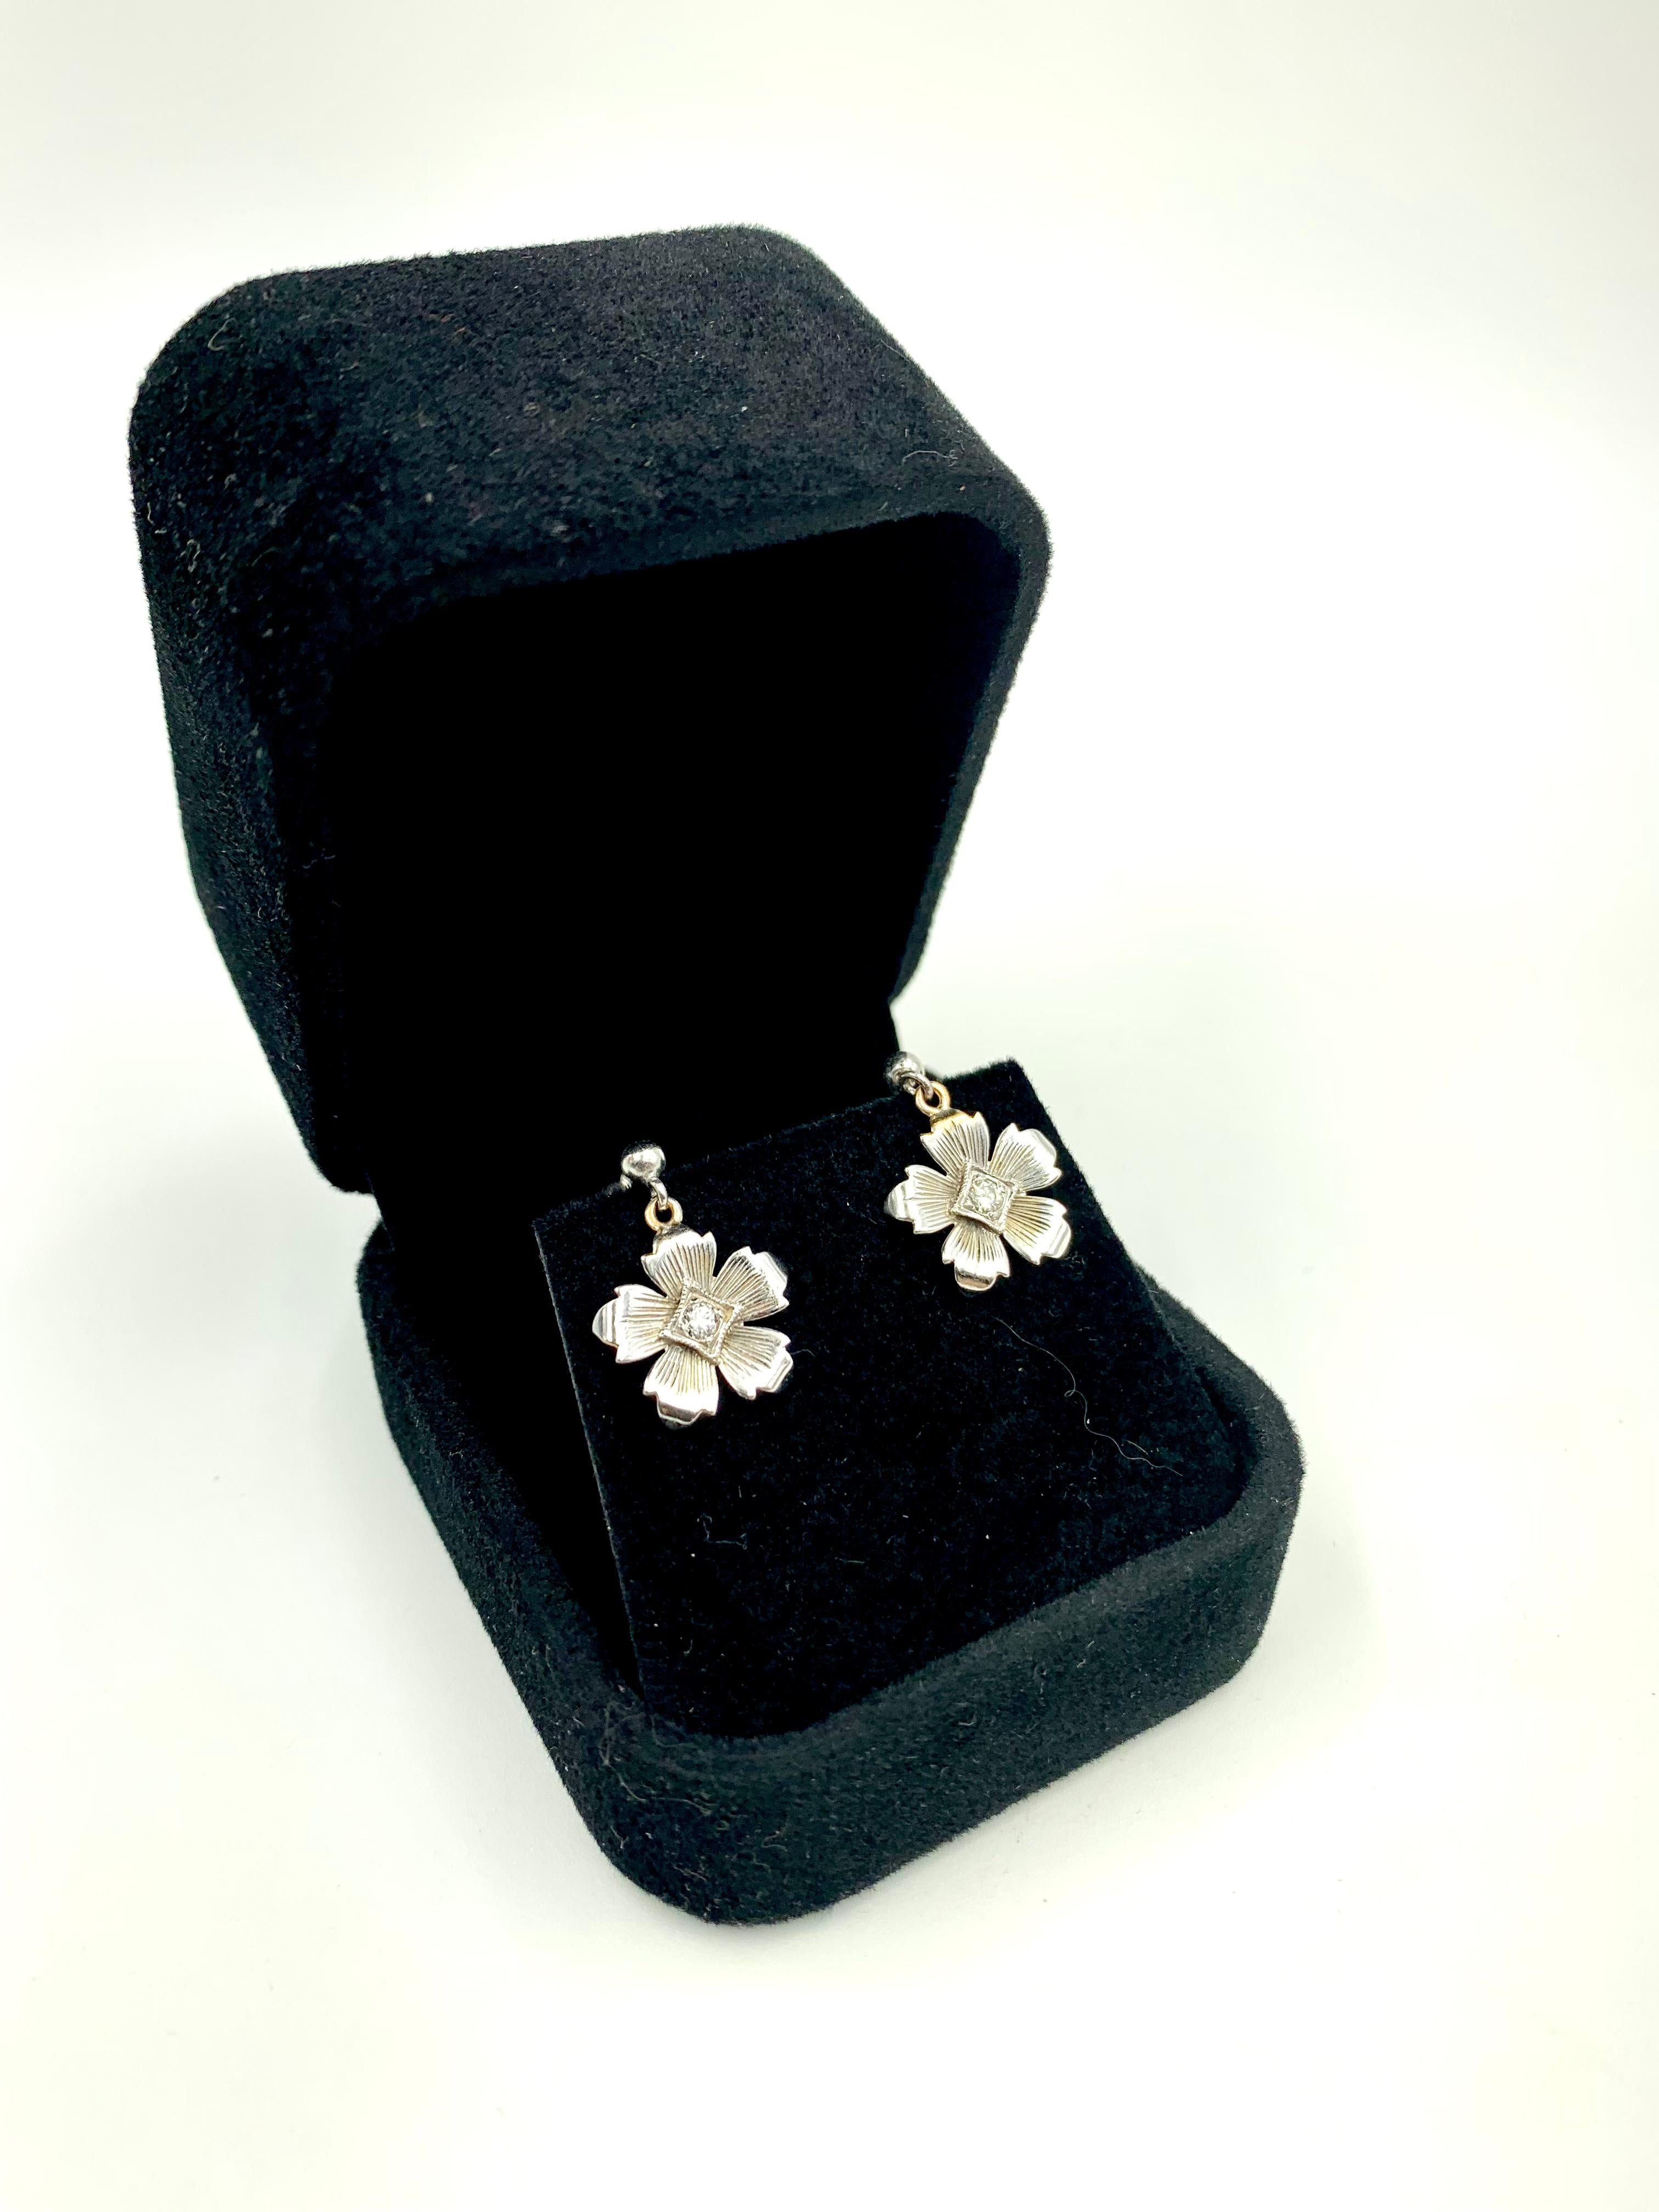 Lovely, romantic Forget-Me-Not flower earrings in 14K white gold with central diamond accents in a stylized diamond shaped setting. Beautiful handwrought details, signed on the back with the makers mark B and 14K.
Very good condition, for pierced